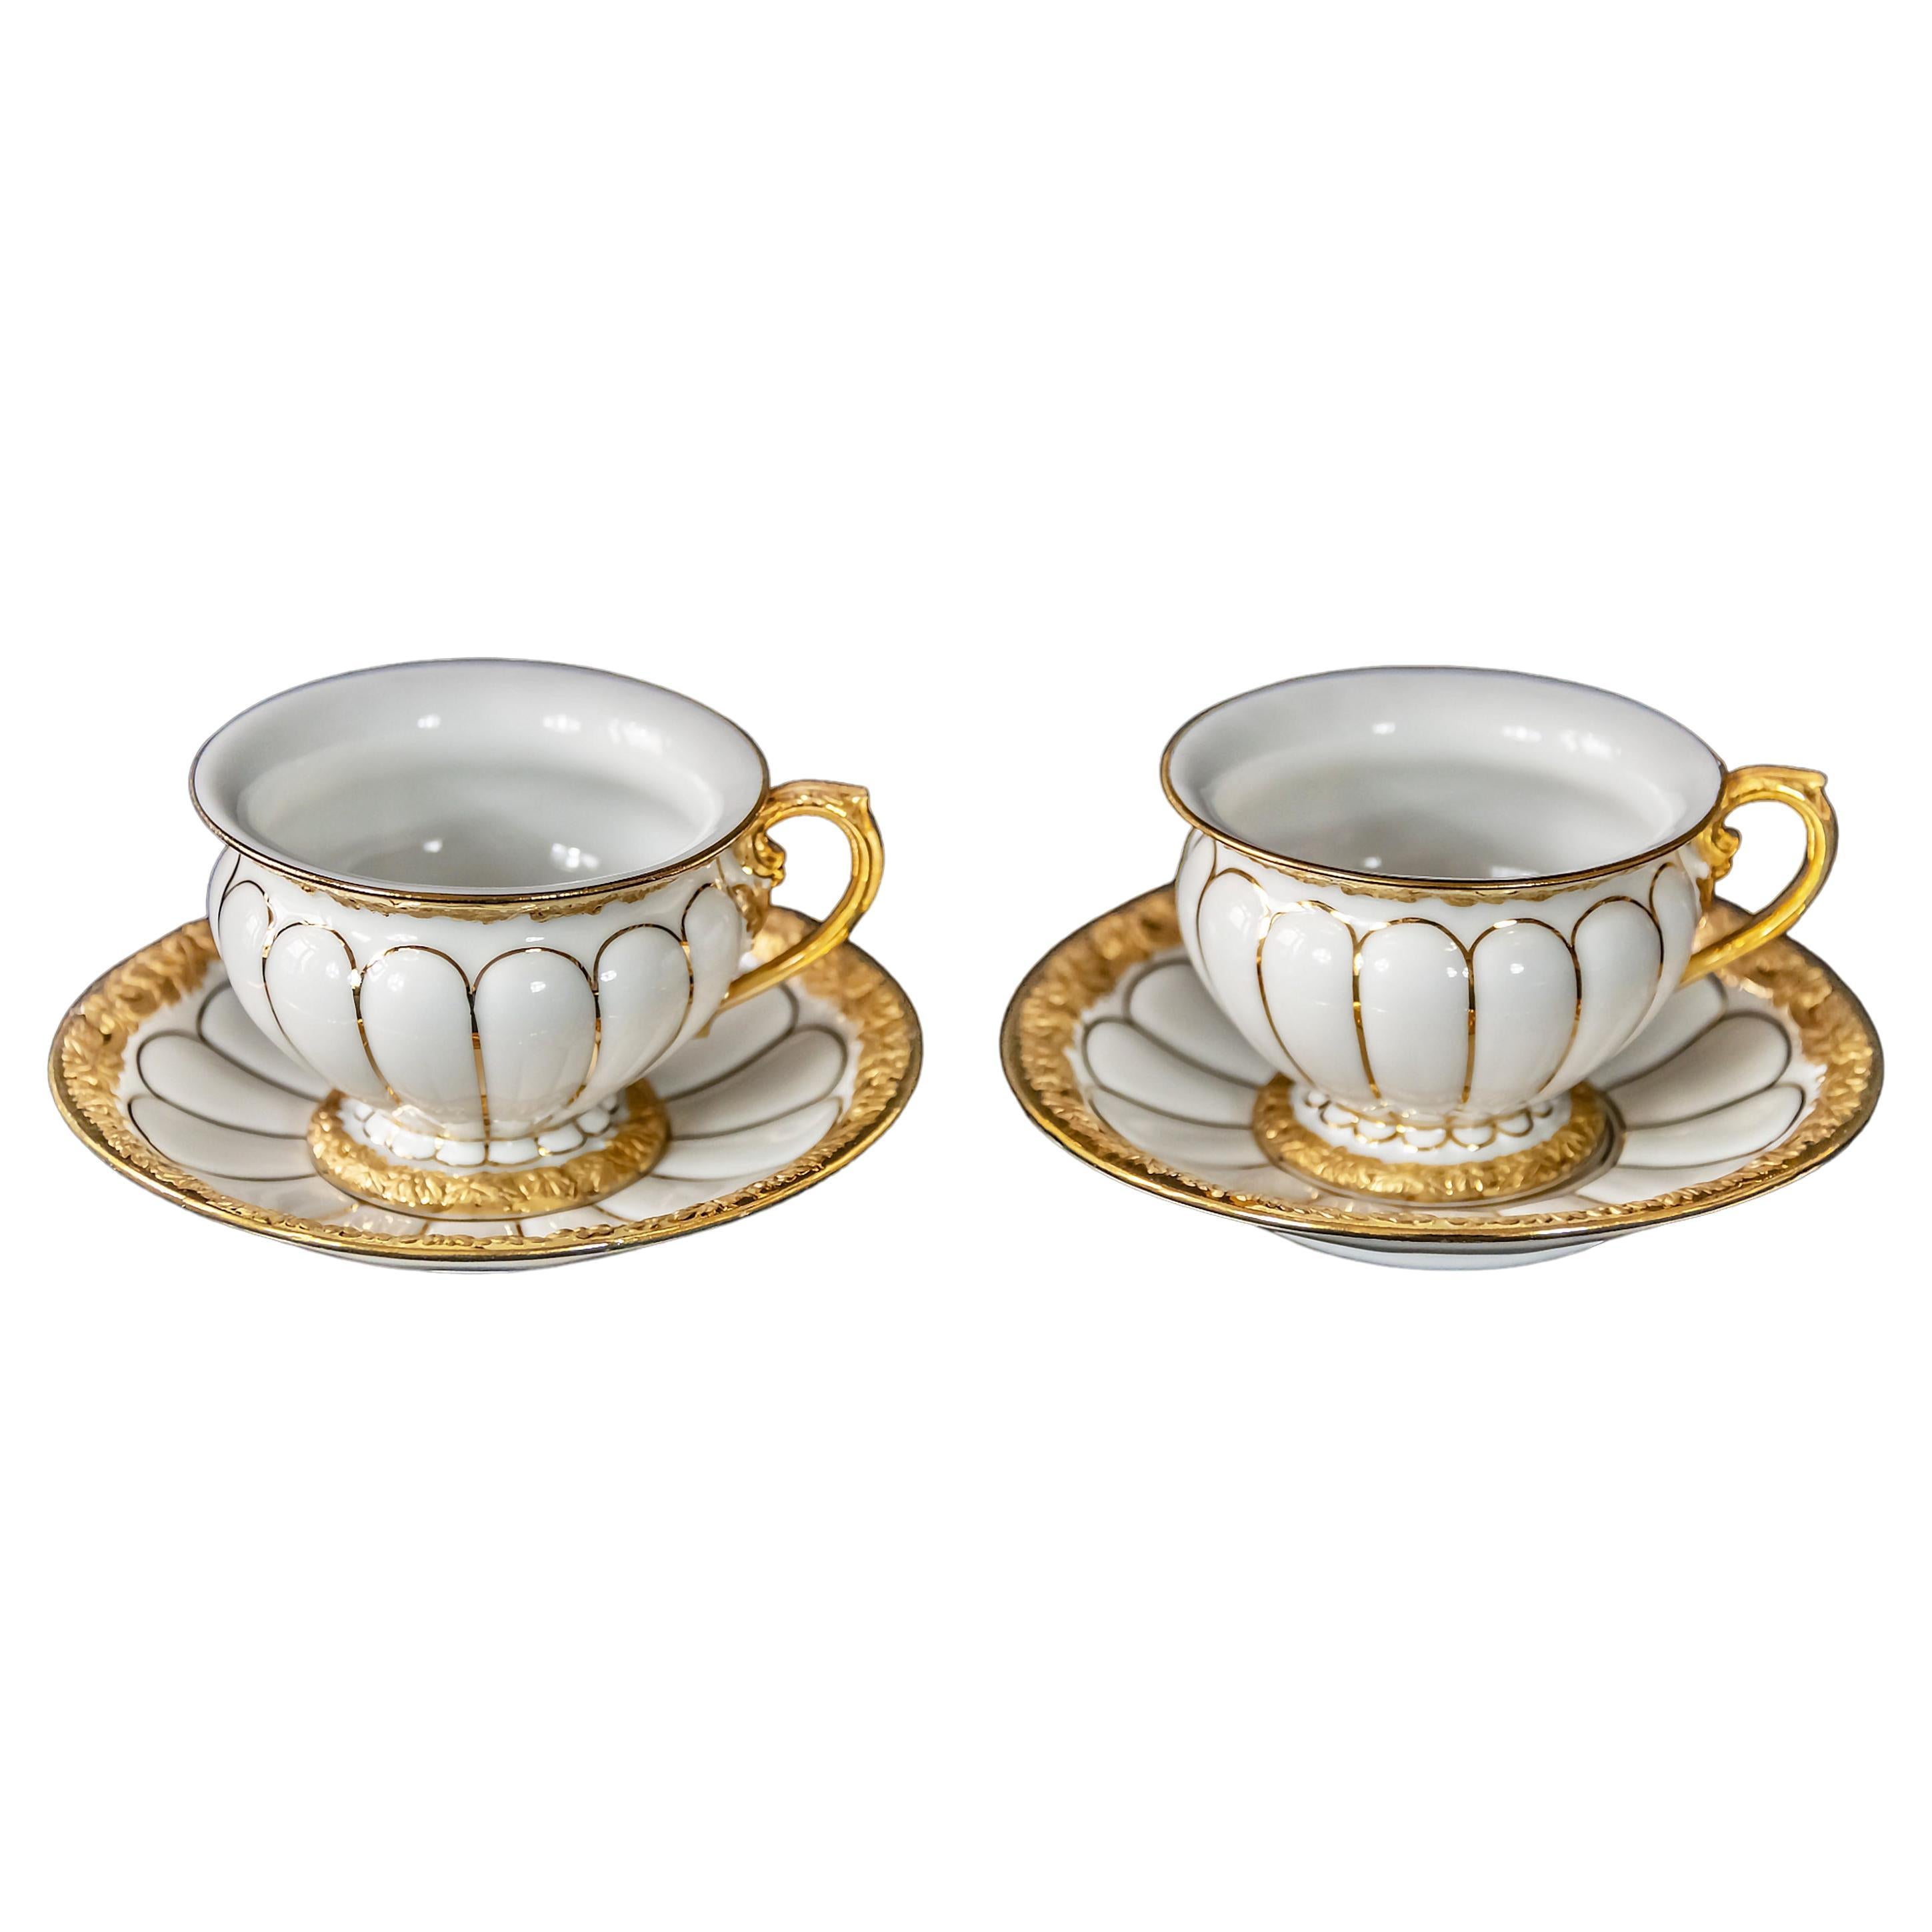 Pair of Meissen Porcelain Coffee Cups with Saucers